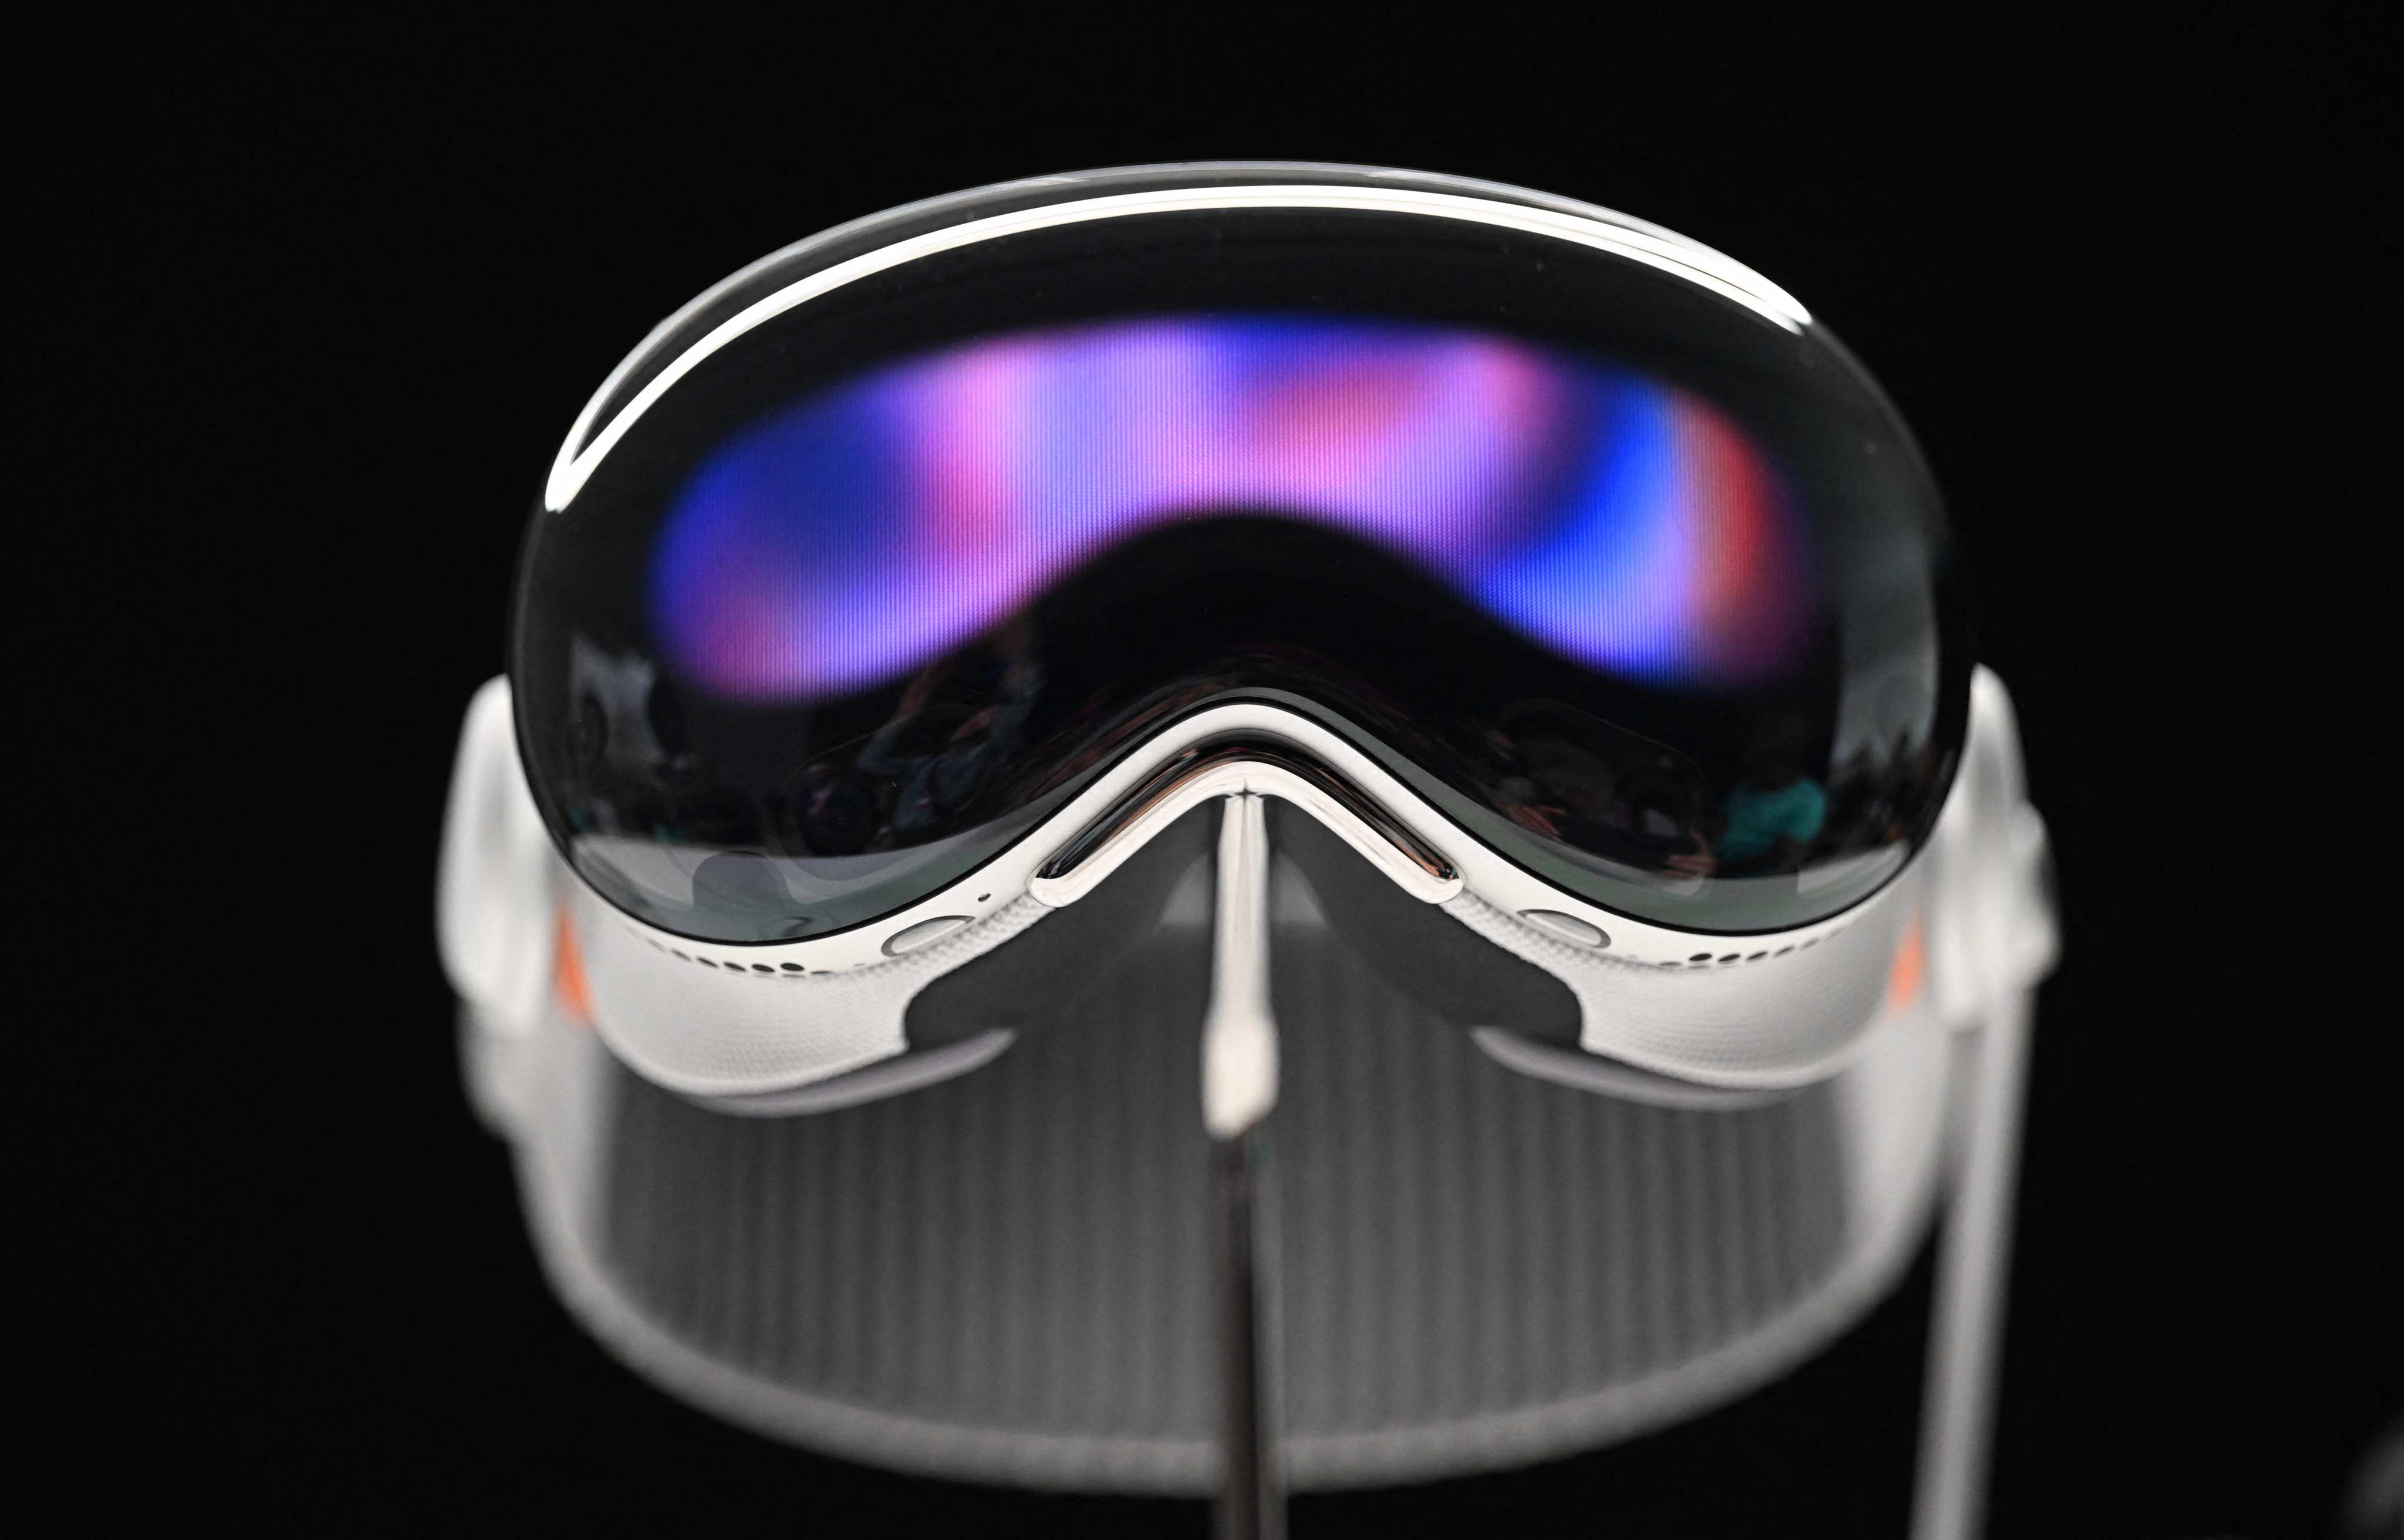 Apple’s new Vision Pro augmented reality headset.
Photo: AFP